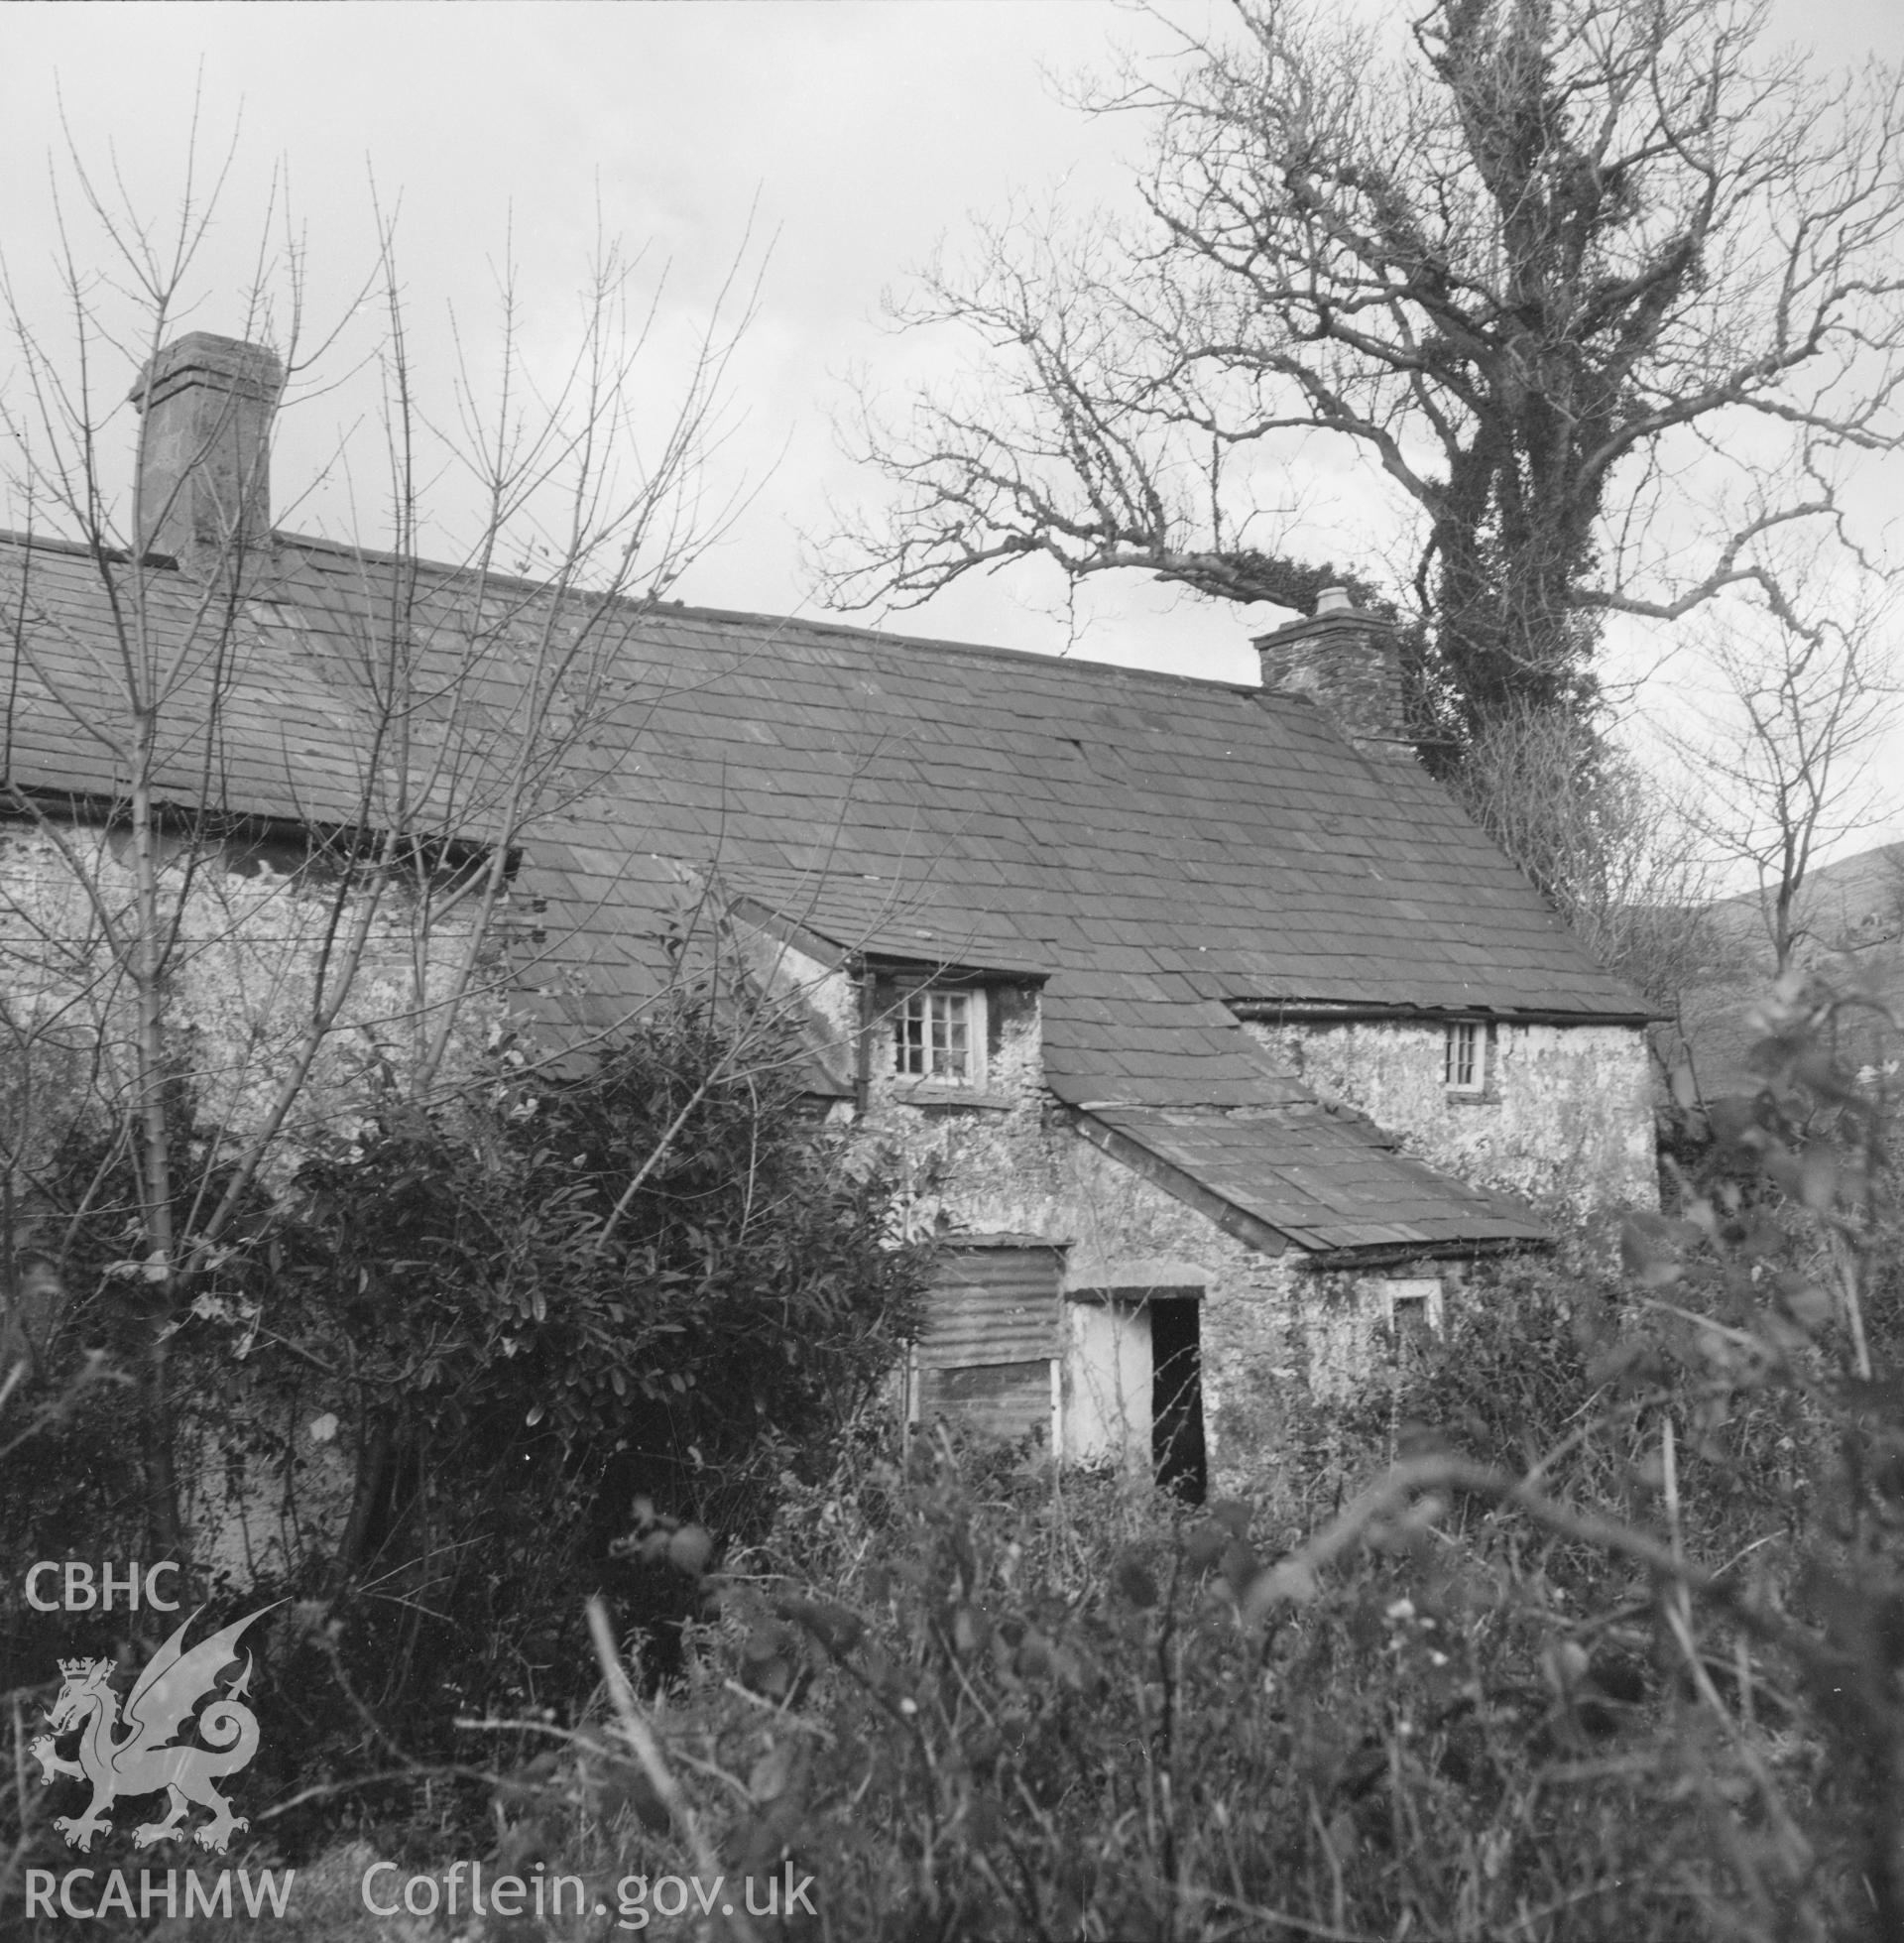 Digital copy of a black and white negative showing Ty'n y Waun, Bettws, taken 17th November 1966.